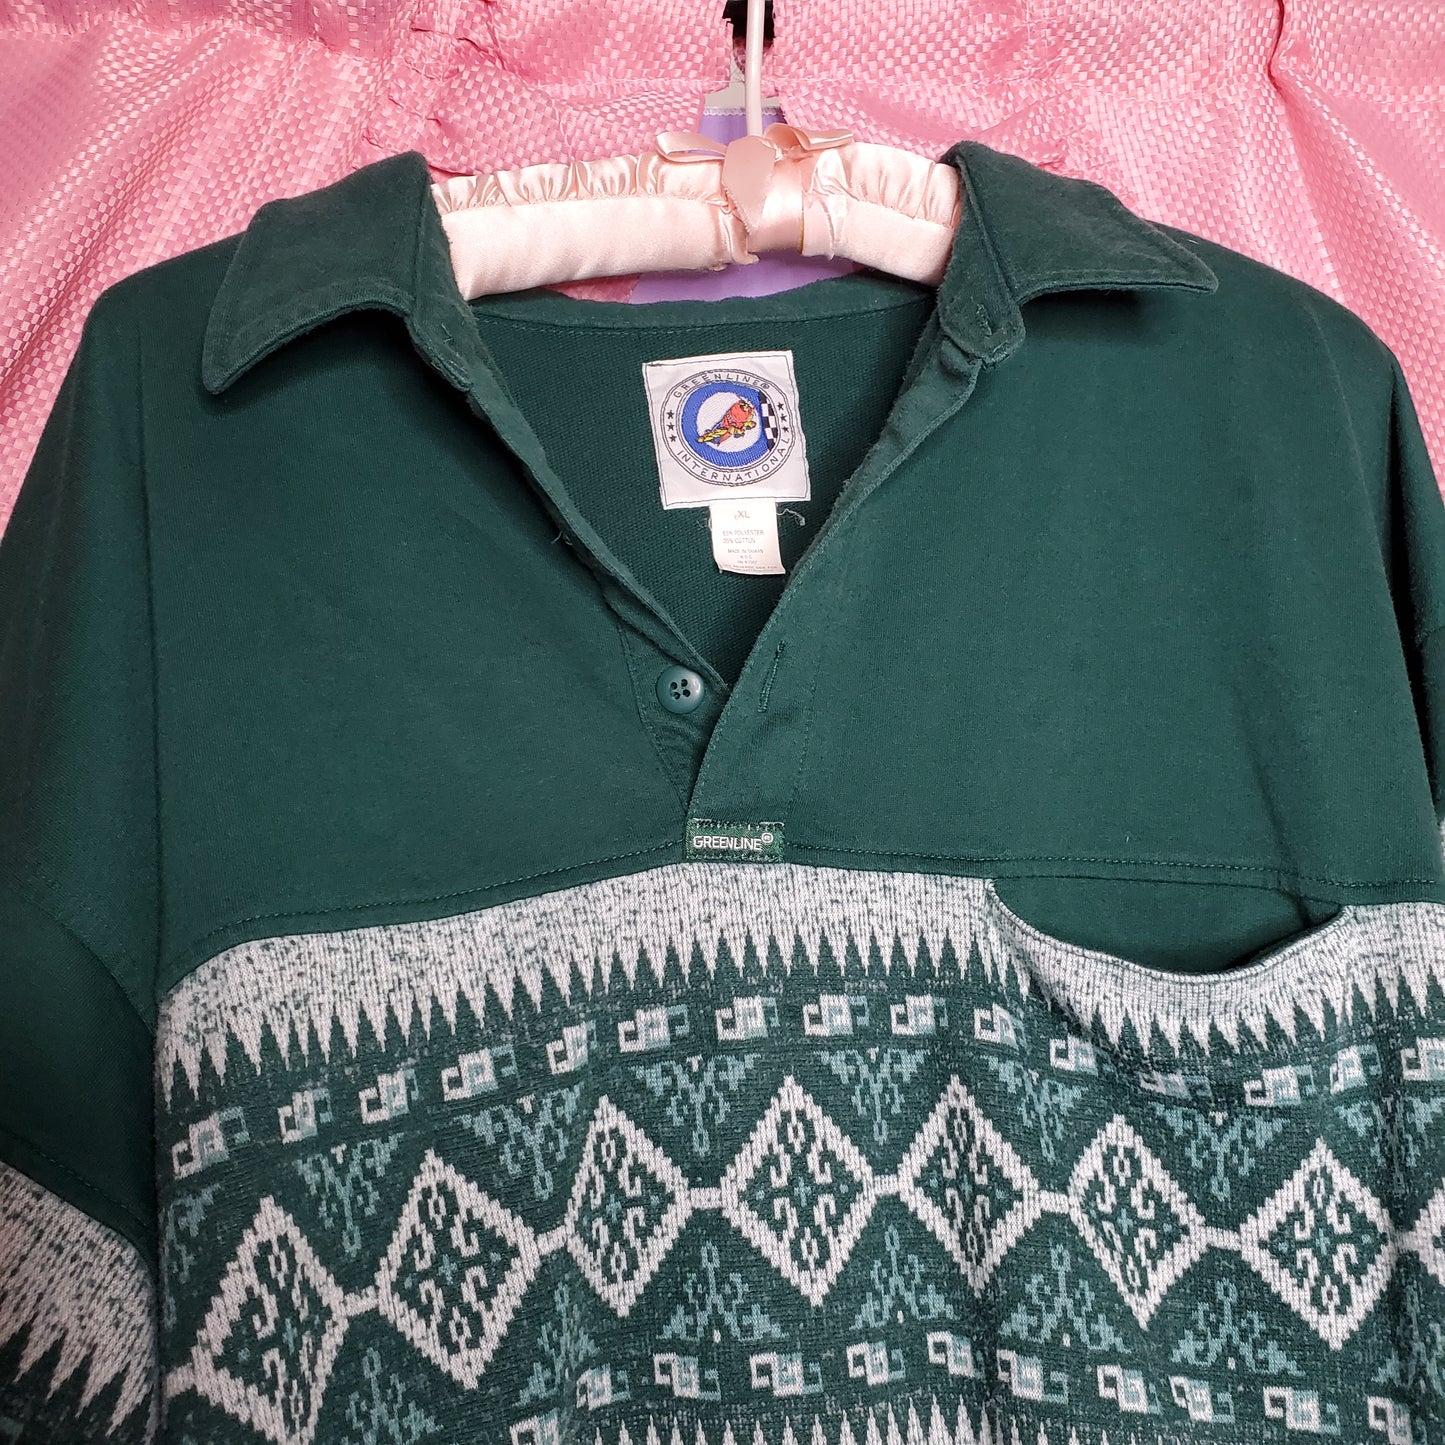 Vintage forest green collared sweater